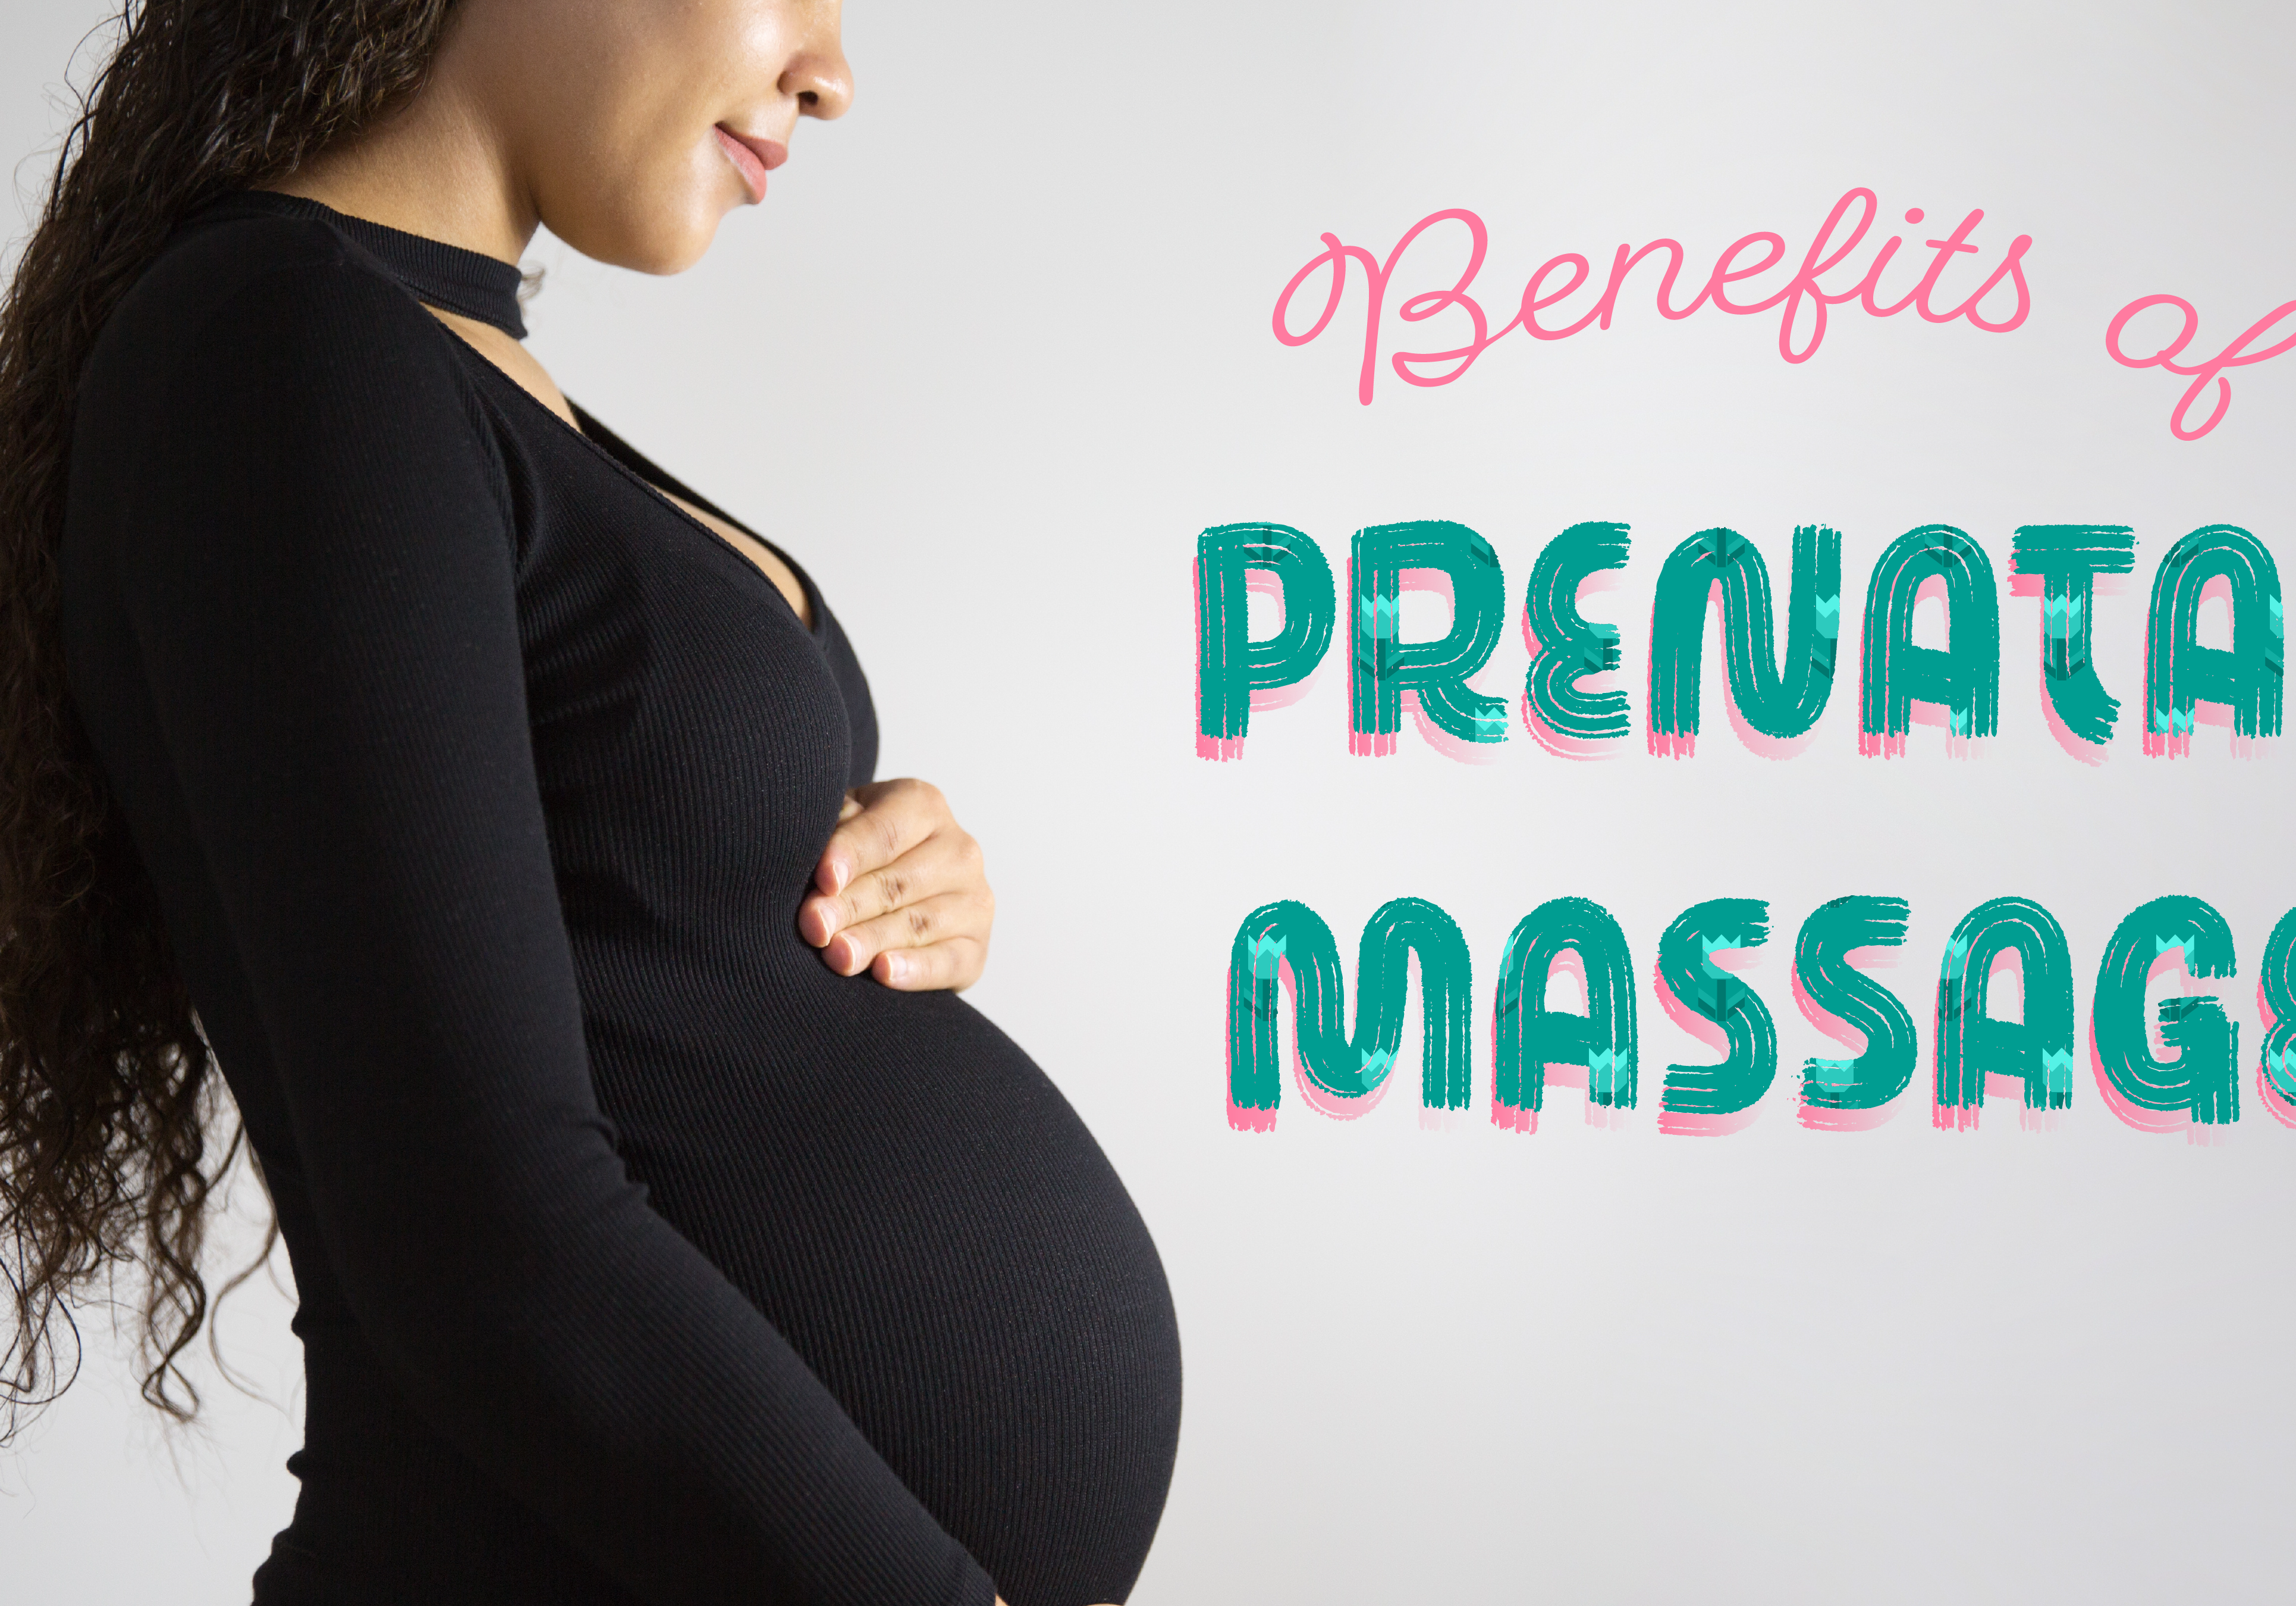 image with alternative article title: benefits of prenatal massage